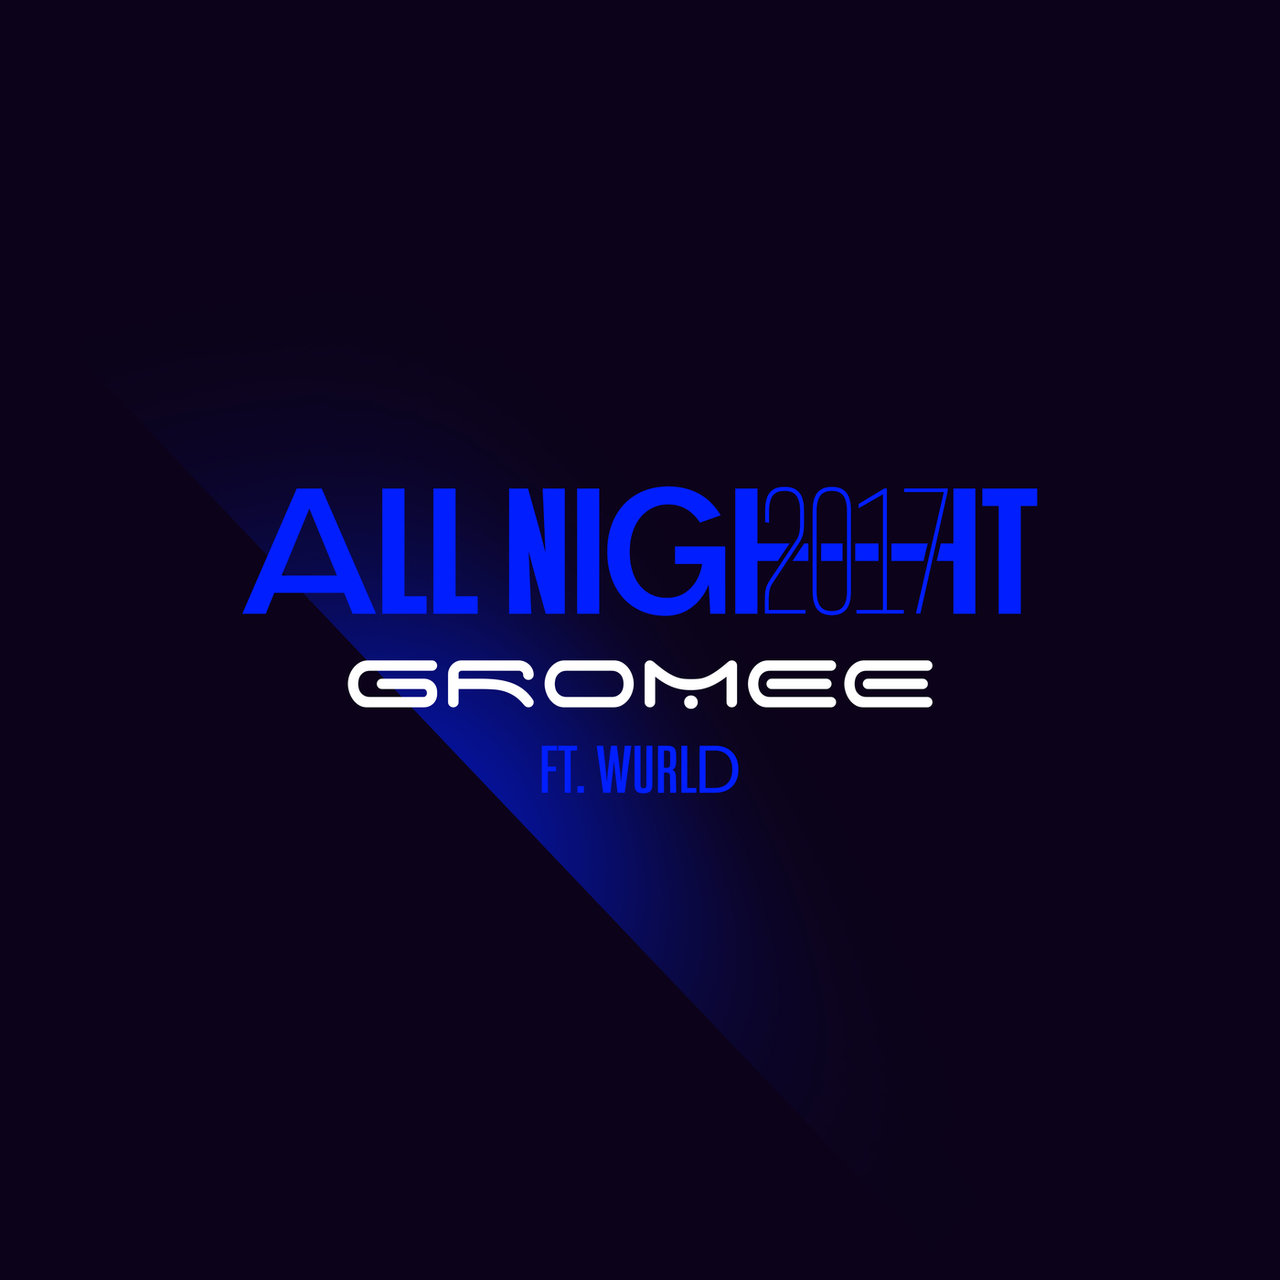 Gromee ft. featuring WurlD All Night 2017 cover artwork